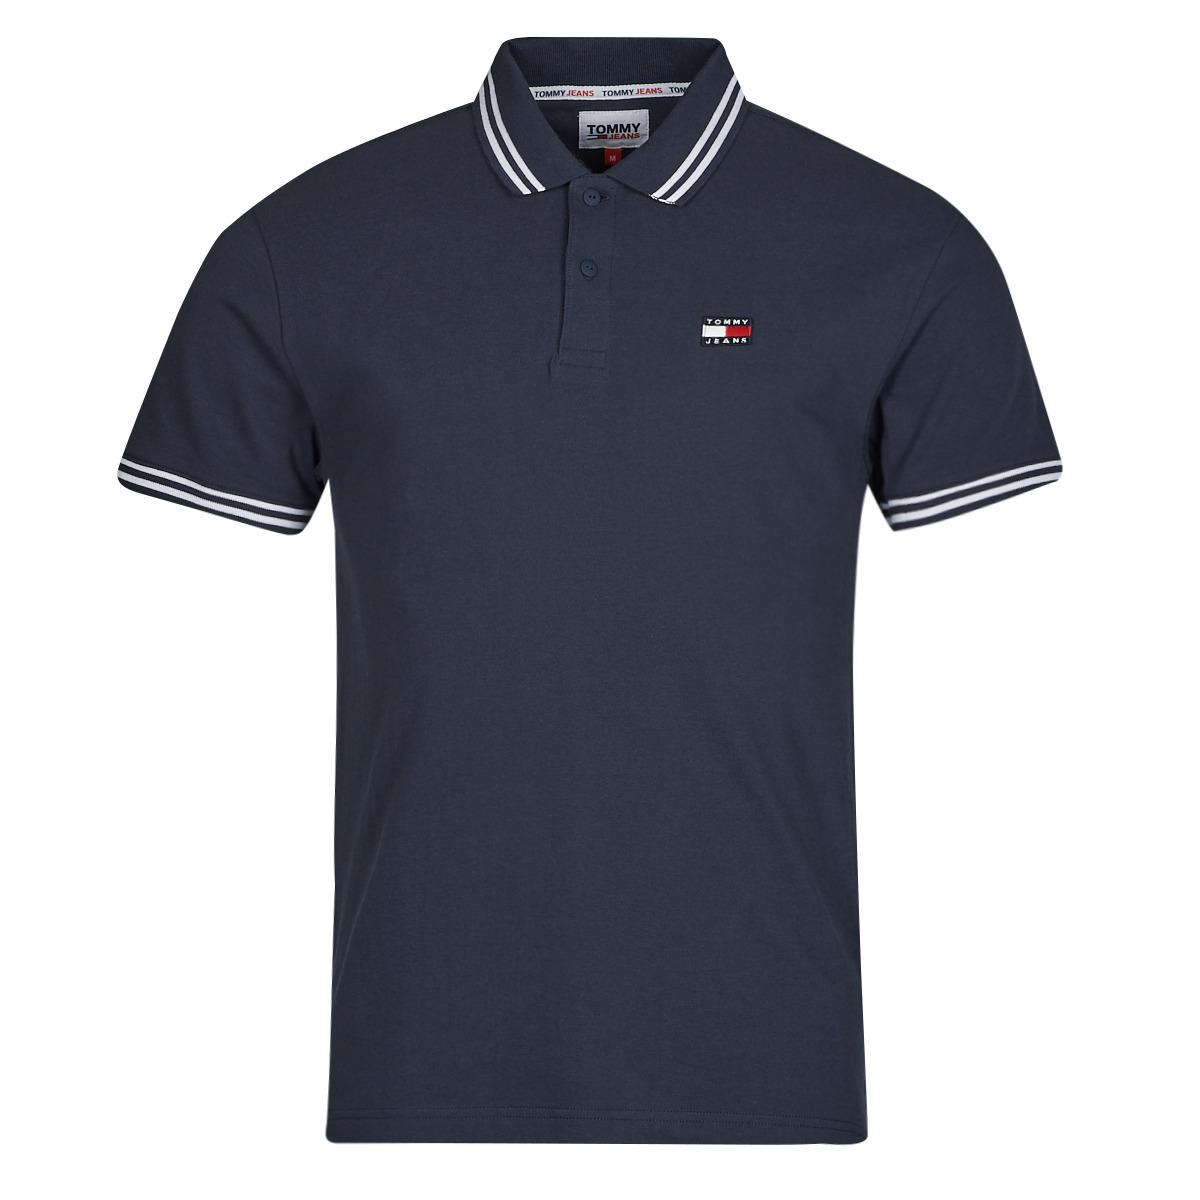 Clothing Free shirts Tommy POLO ! NET delivery - Men short-sleeved polo - DETAIL CLSC Marine | TIPPING TJM Spartoo Jeans